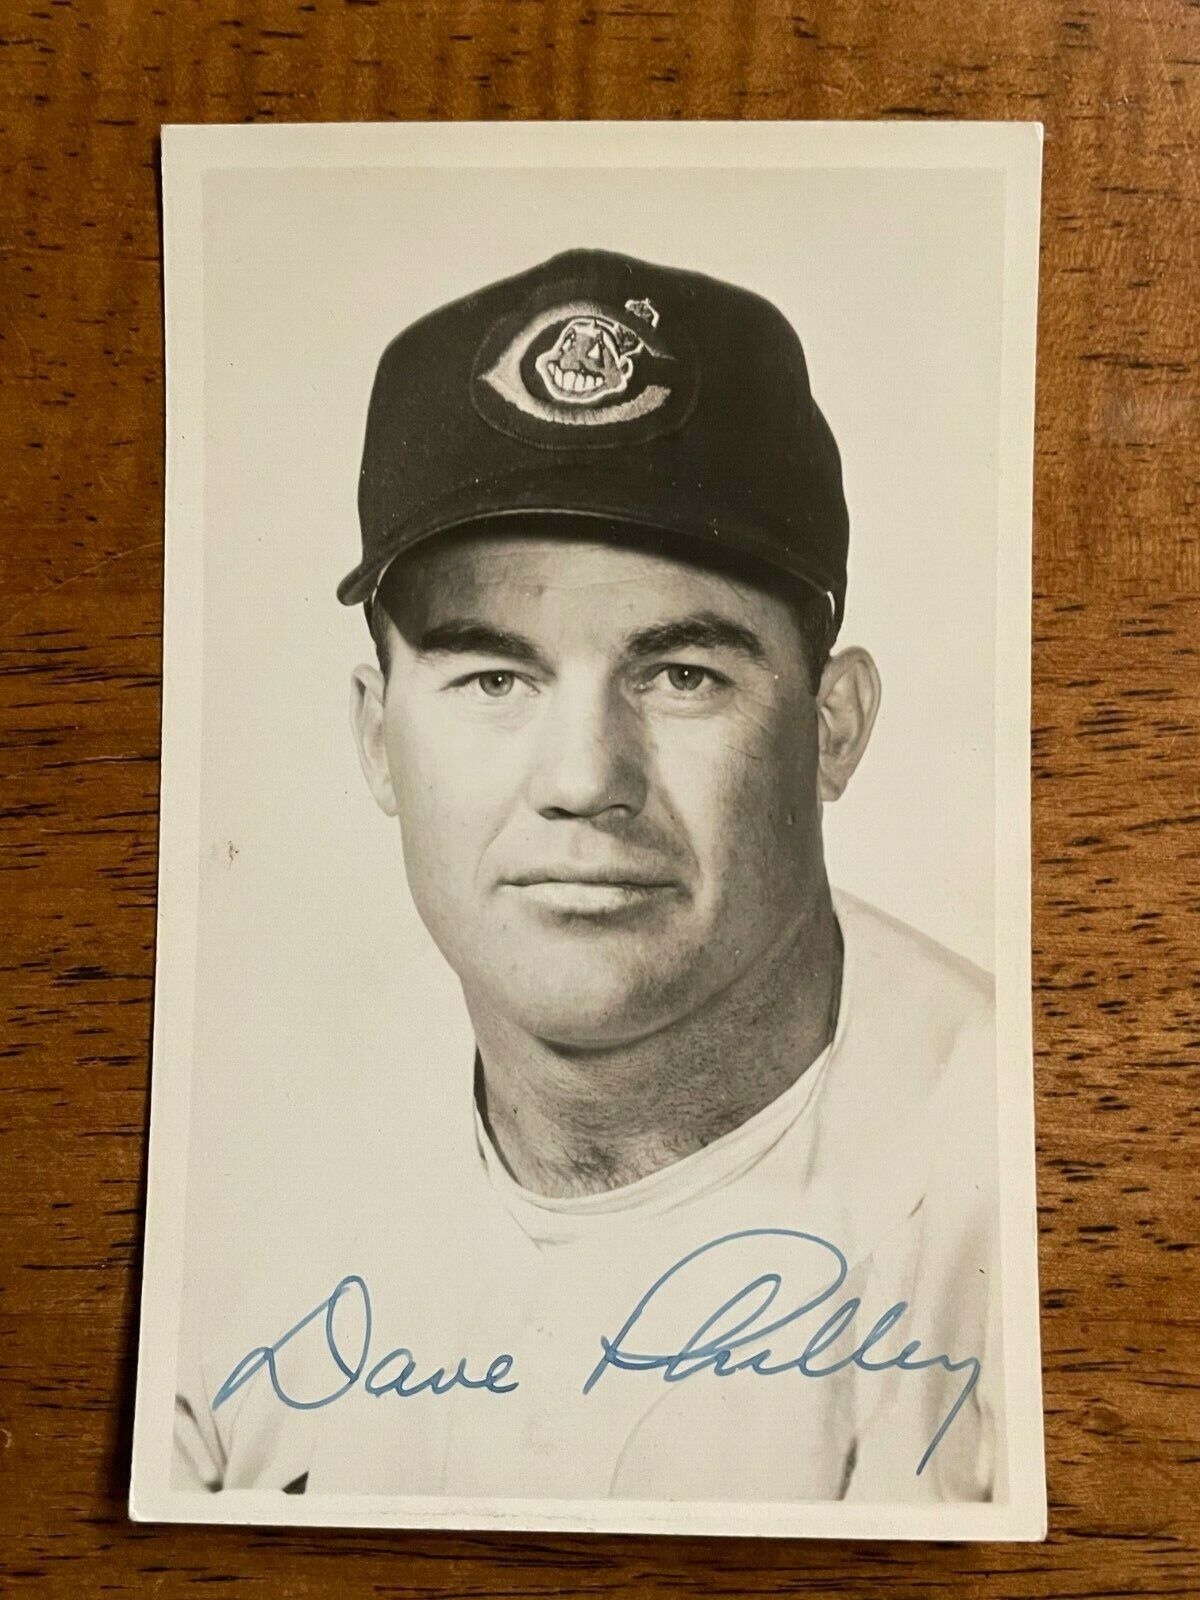 1955 Cleveland Indians Dave Philley Signed Postcard